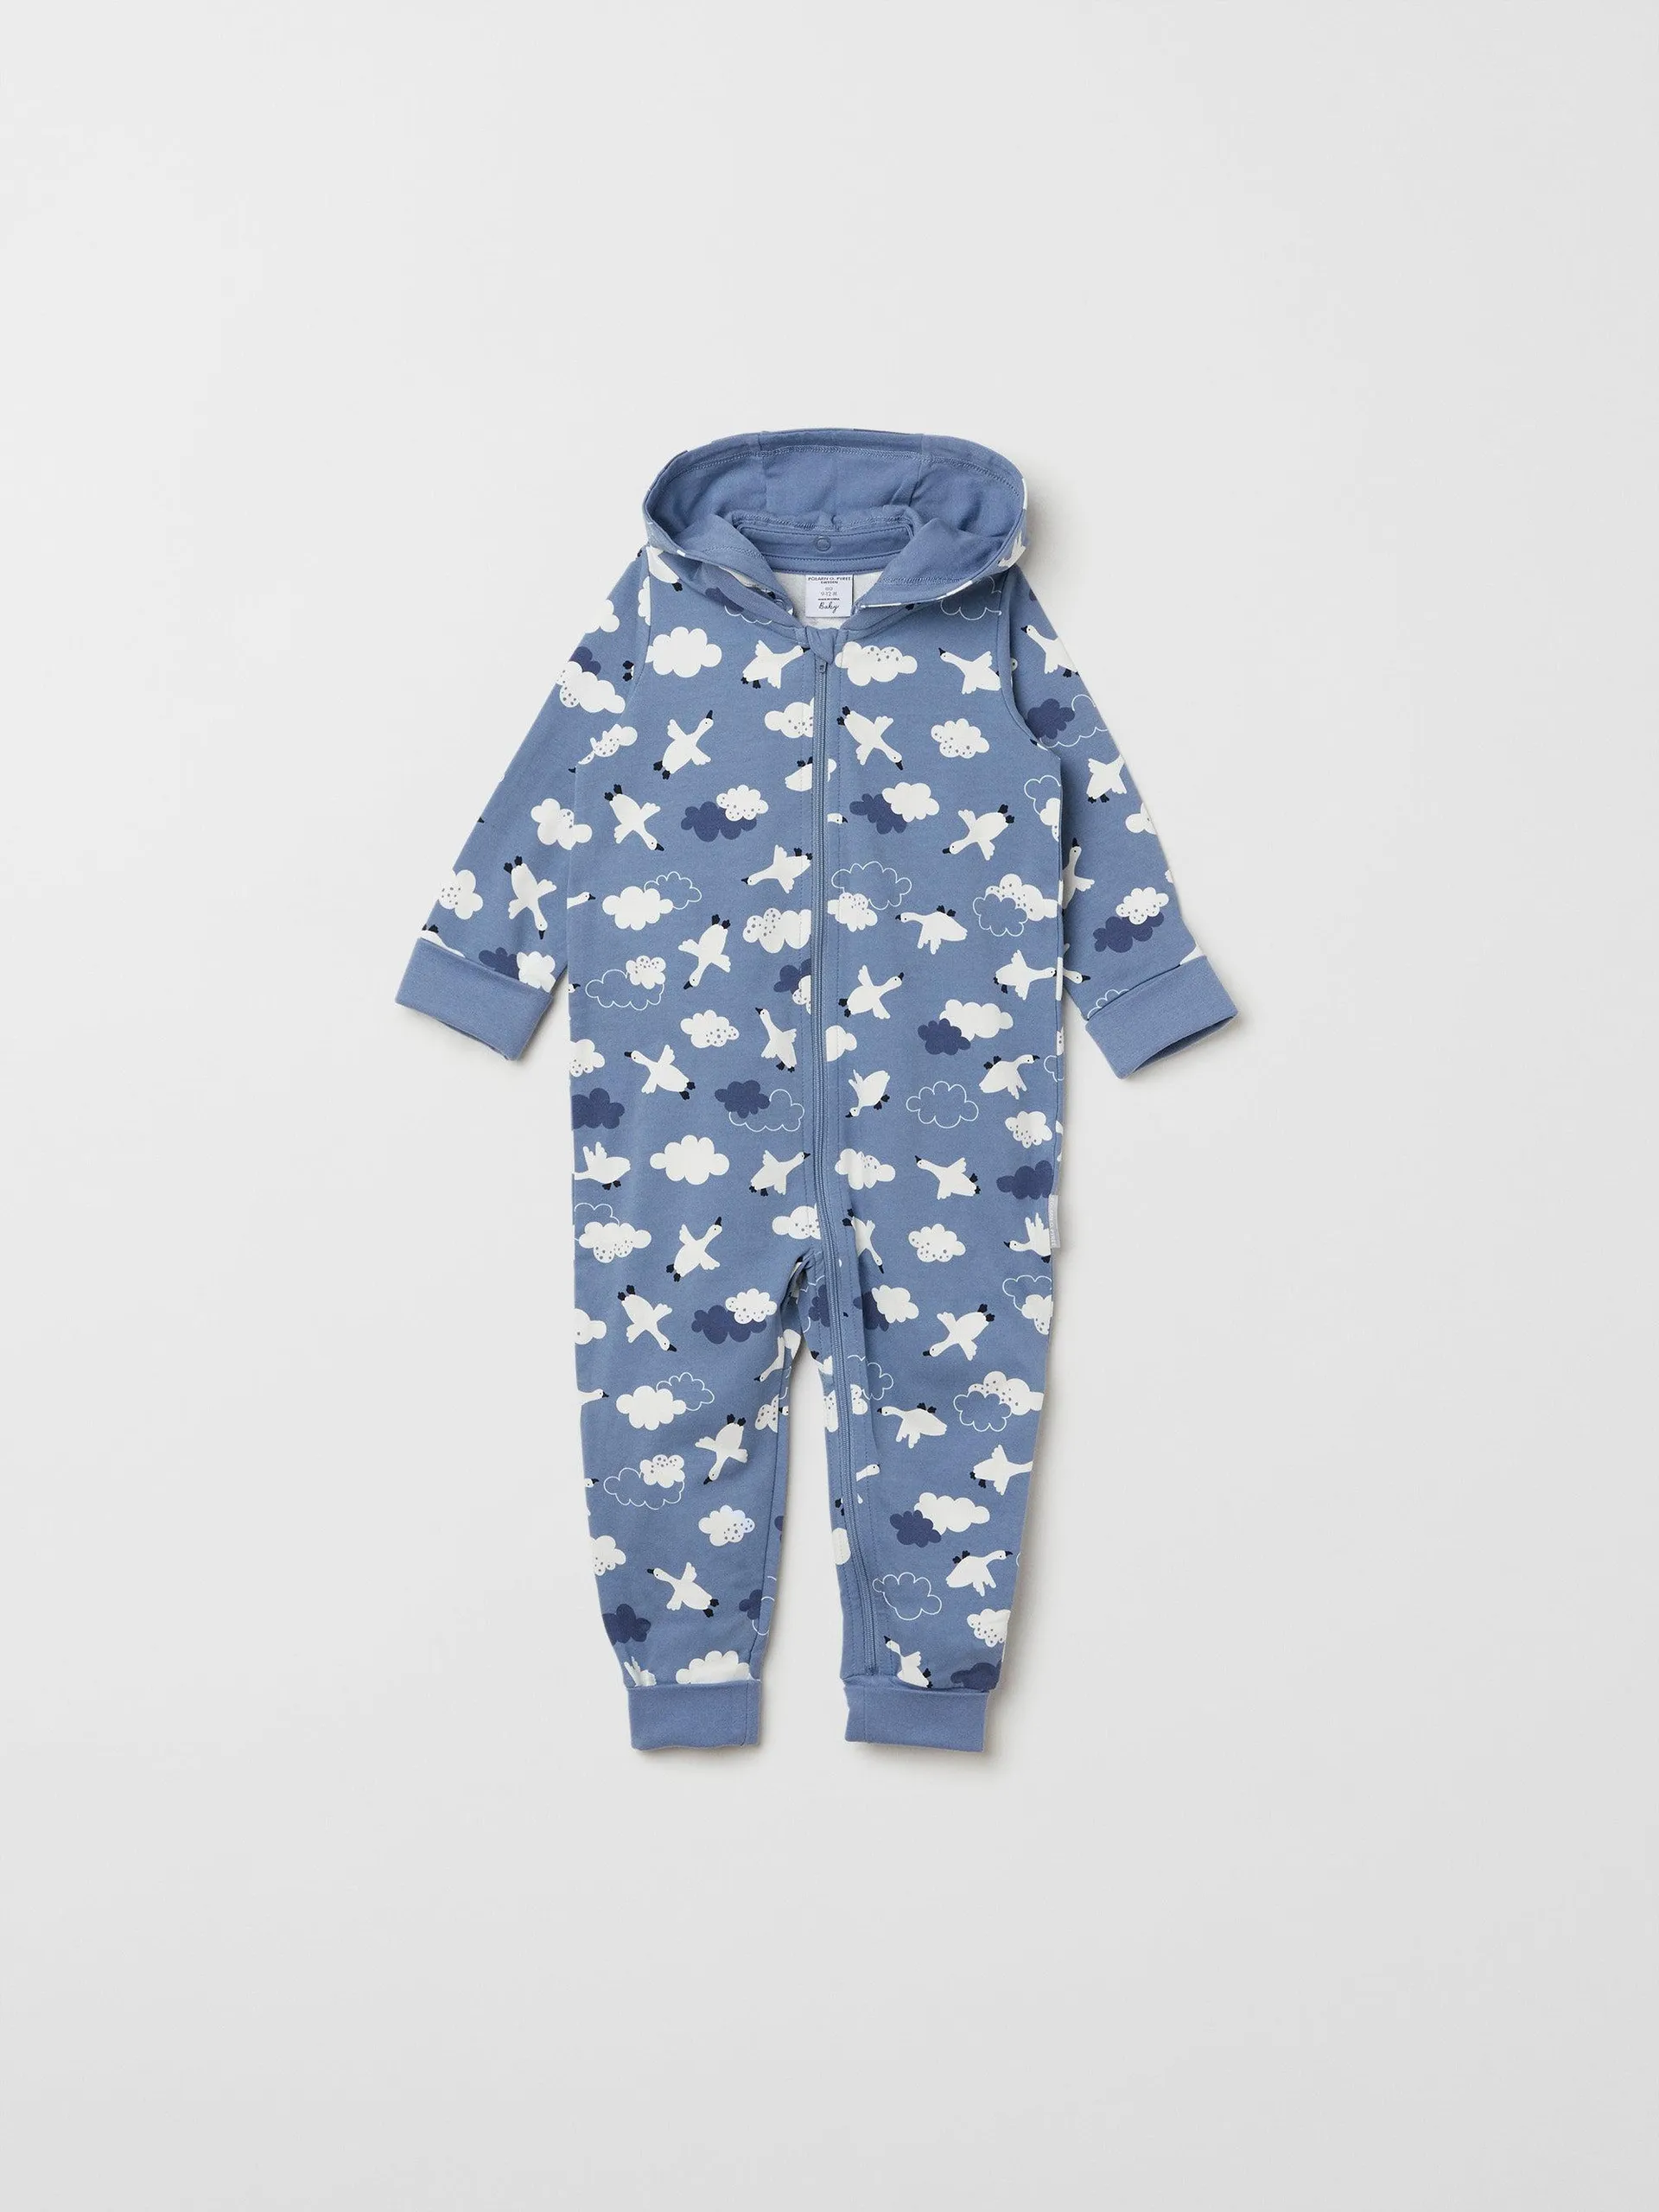 Bird Print Baby All-in-one